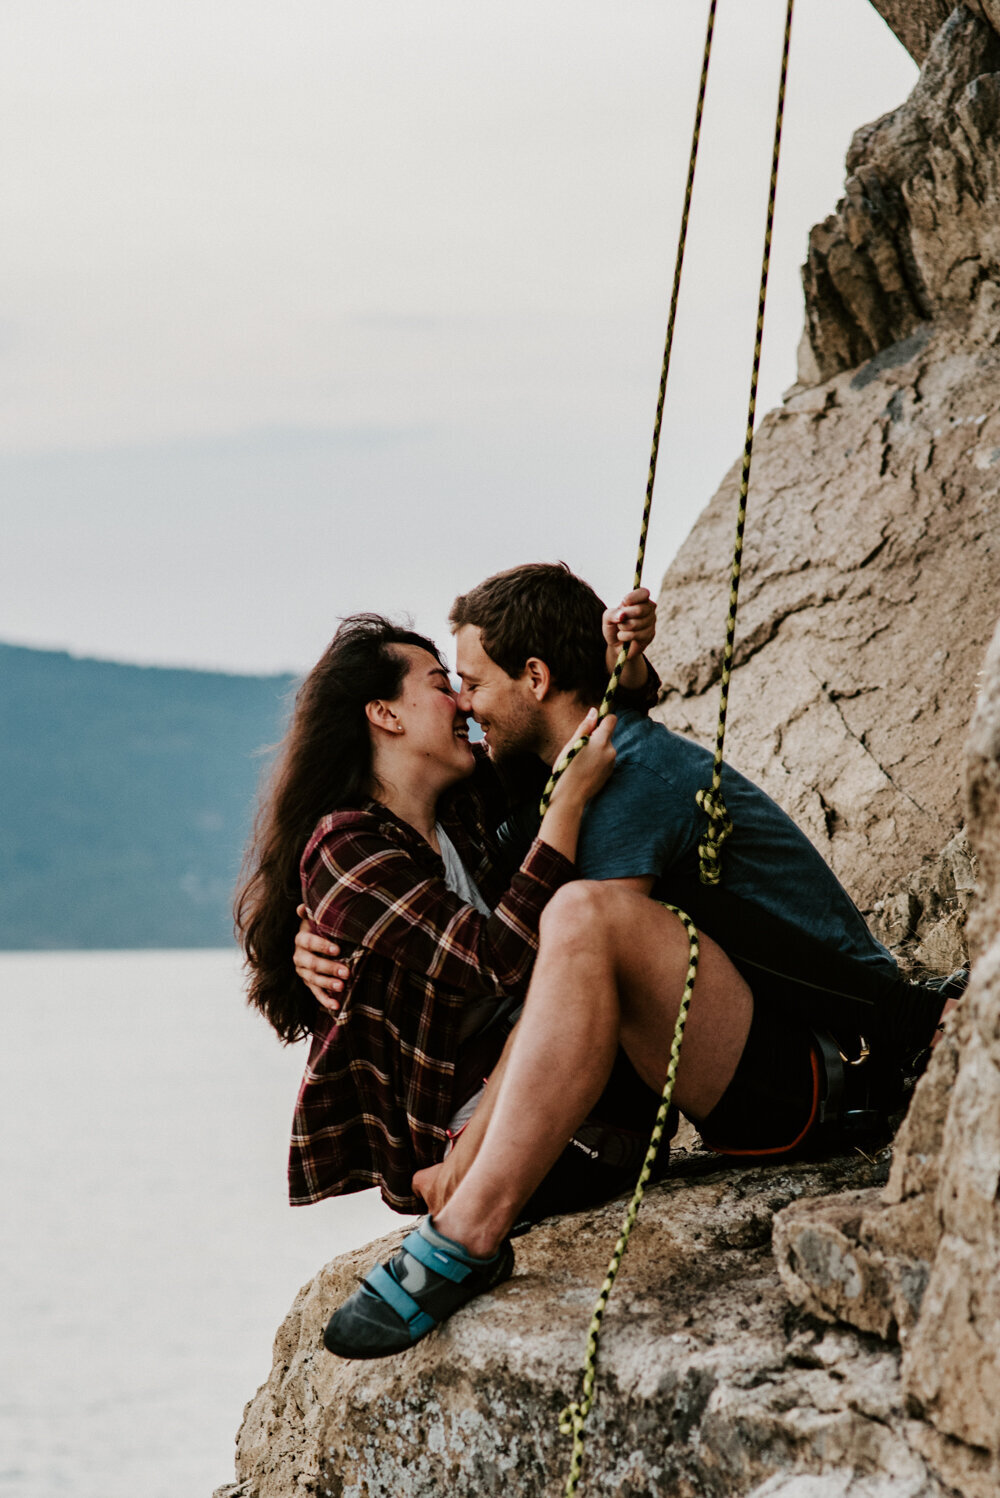 Rock climbing photo session for engagement in Squamish, BC